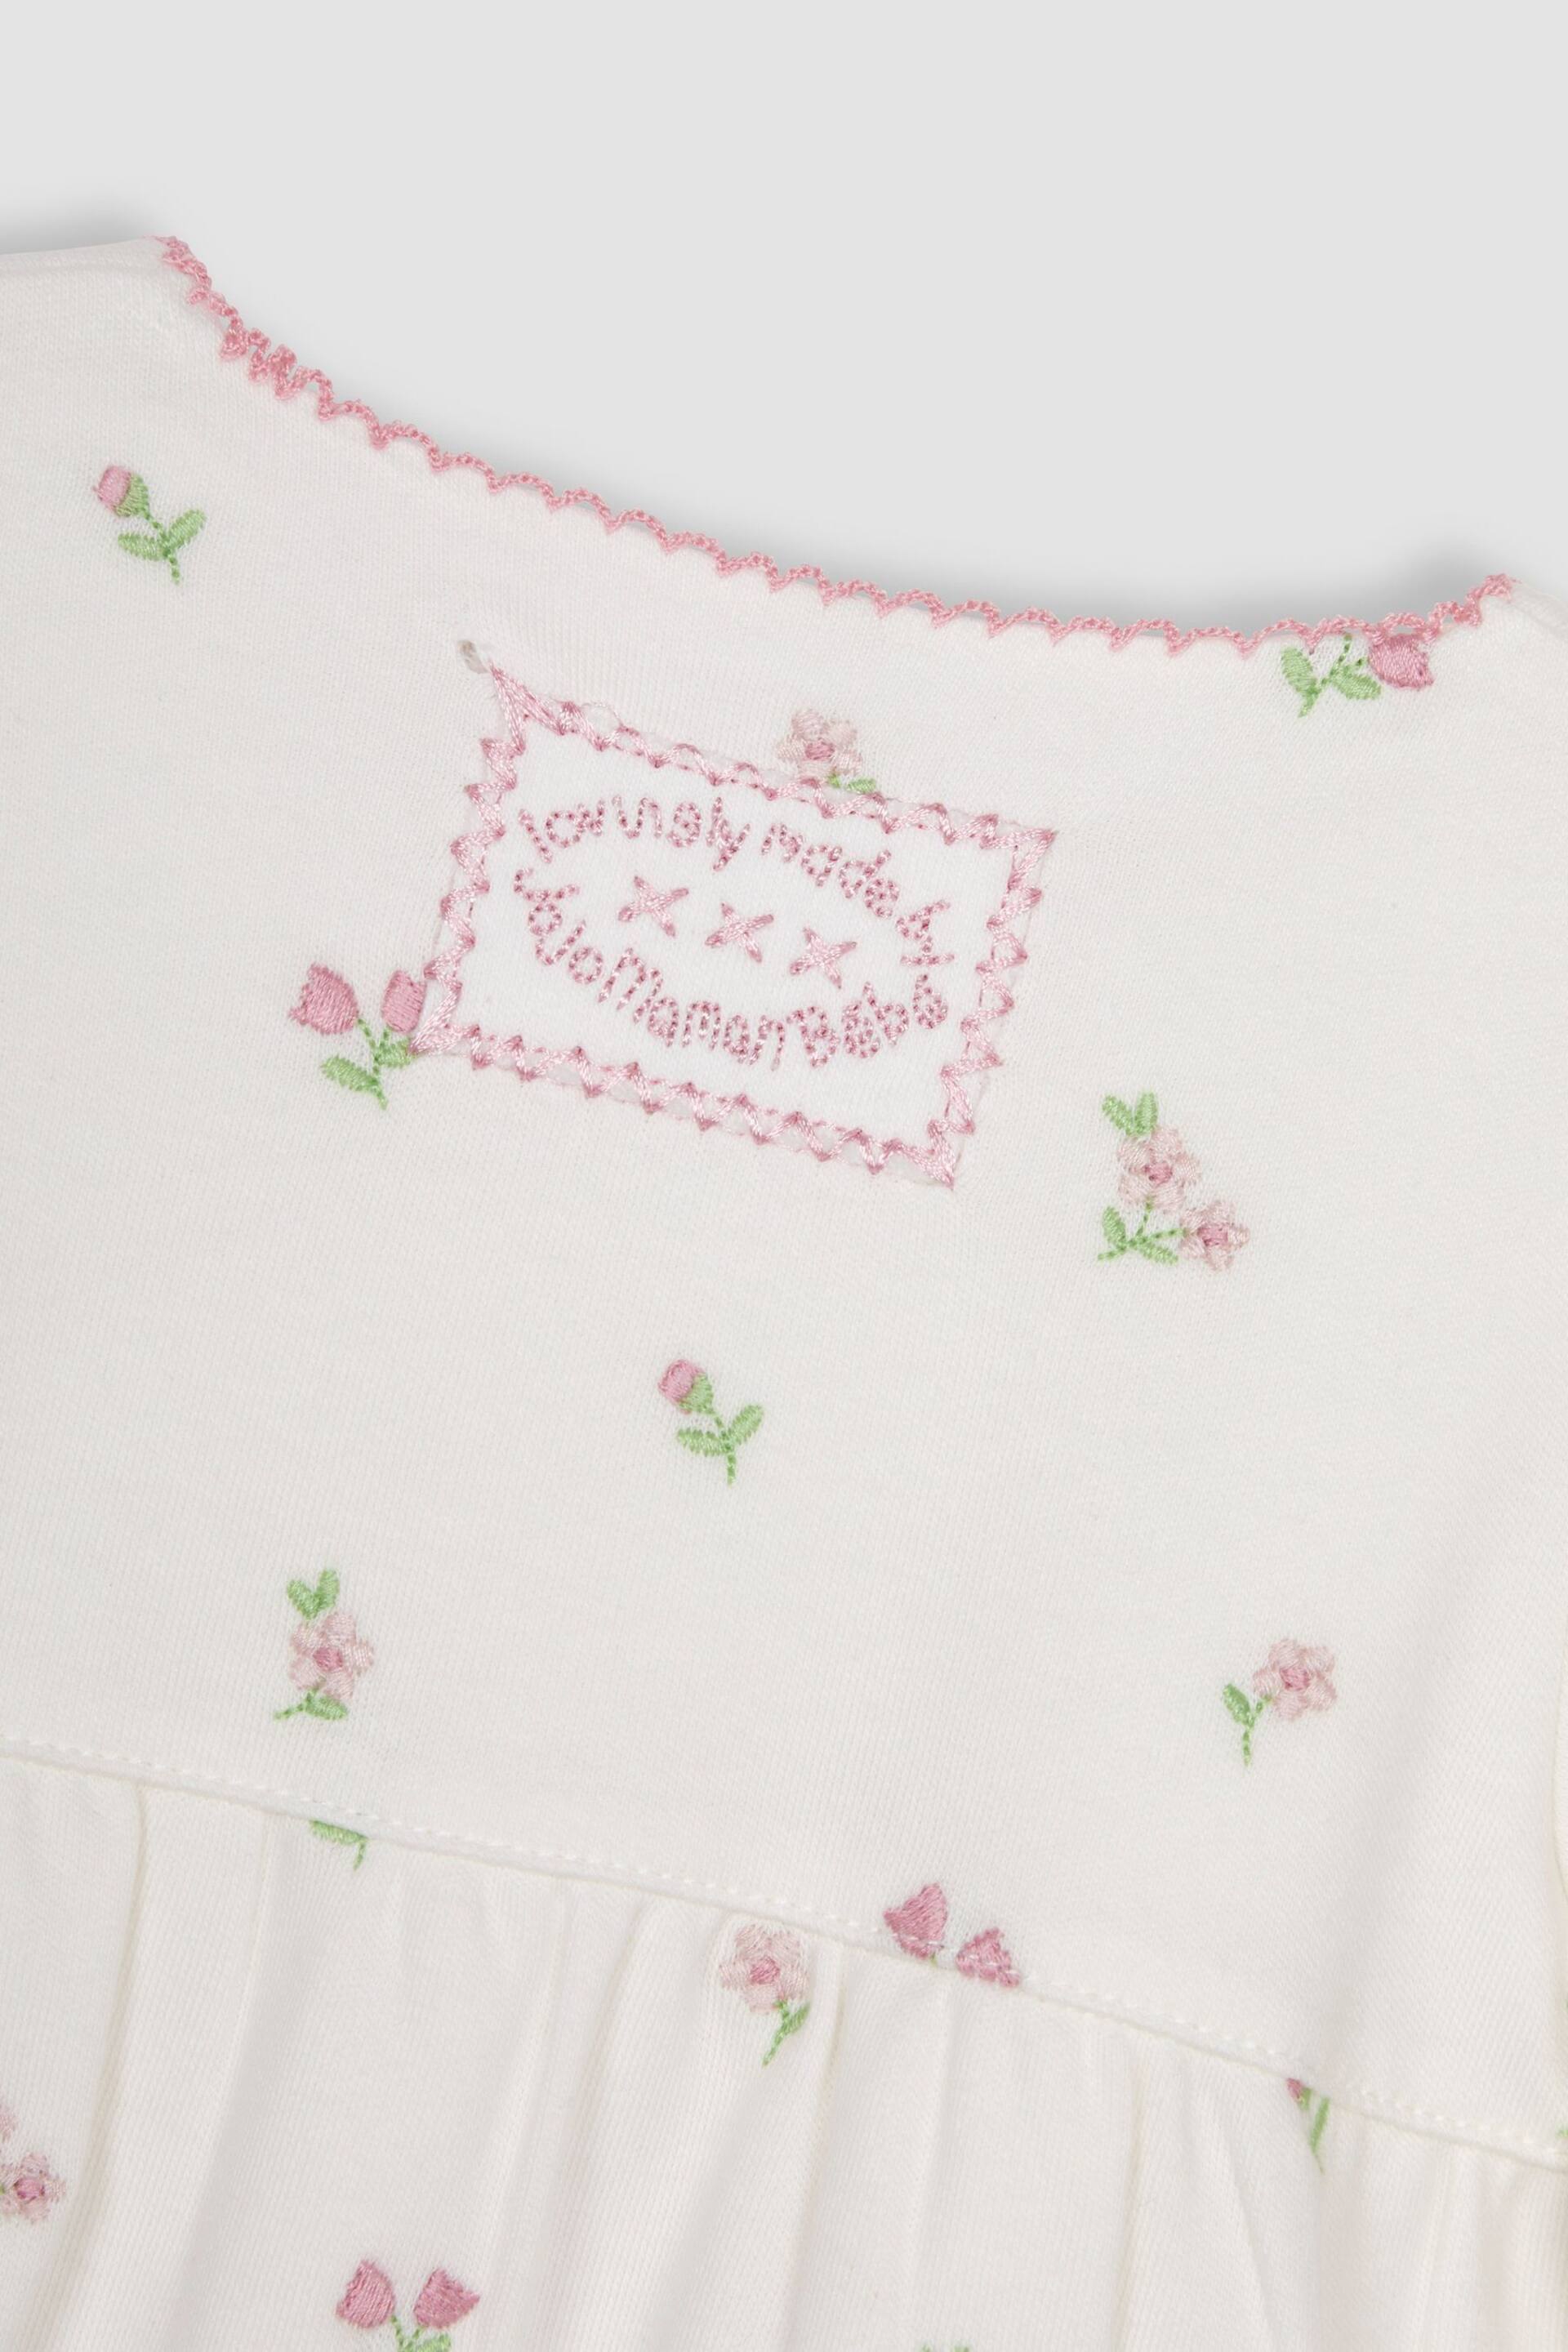 JoJo Maman Bébé Cream Floral Embroidered Pretty Sleepsuit & Hat - Image 5 of 5